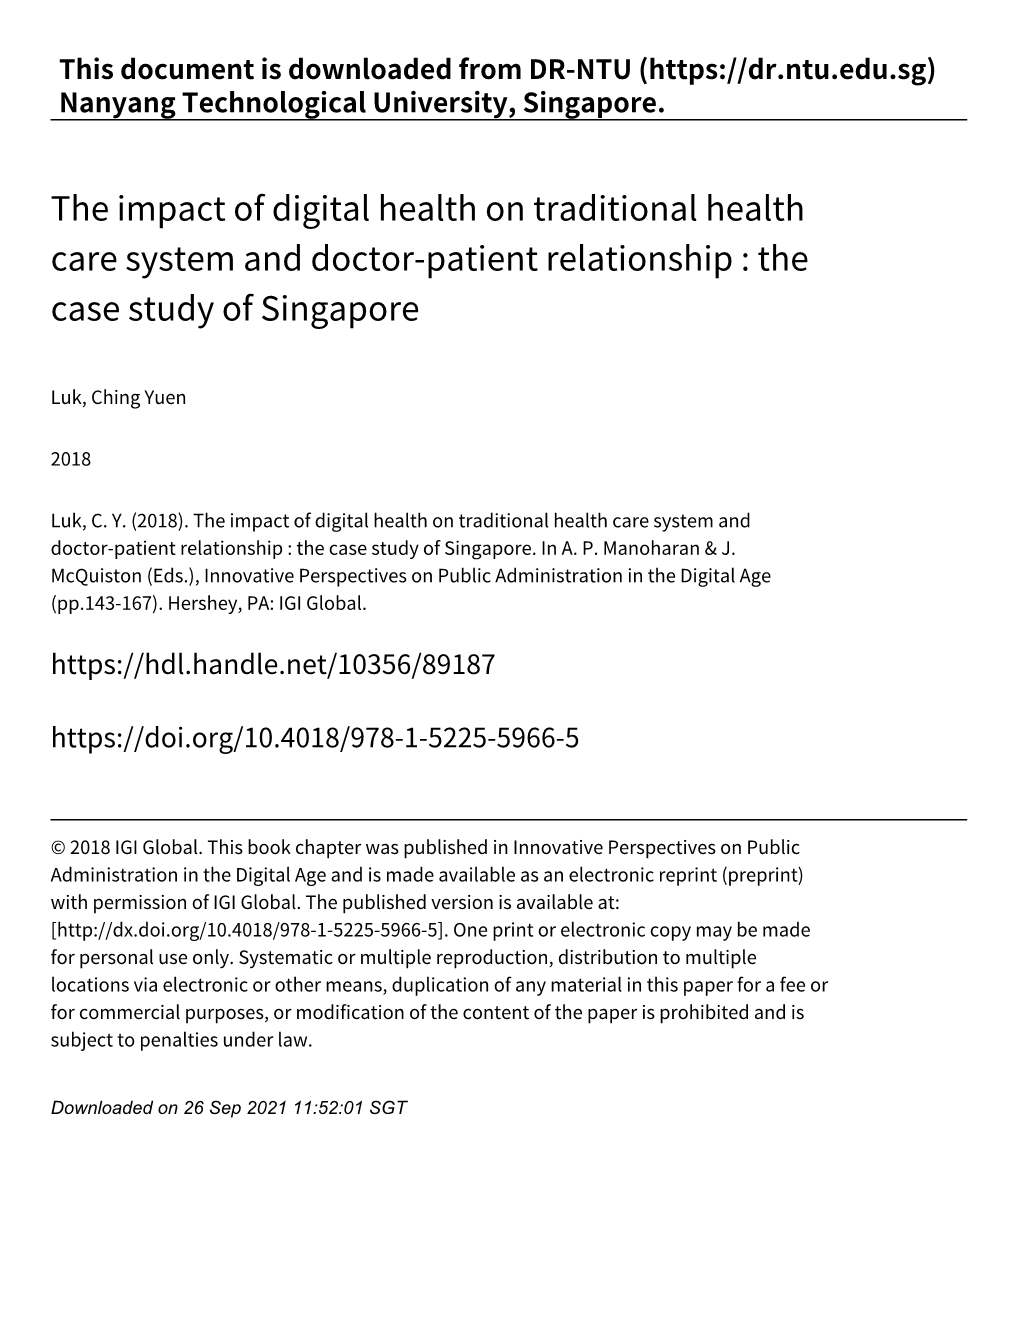 The Impact of Digital Health on Traditional Health Care System and Doctor‑Patient Relationship : the Case Study of Singapore